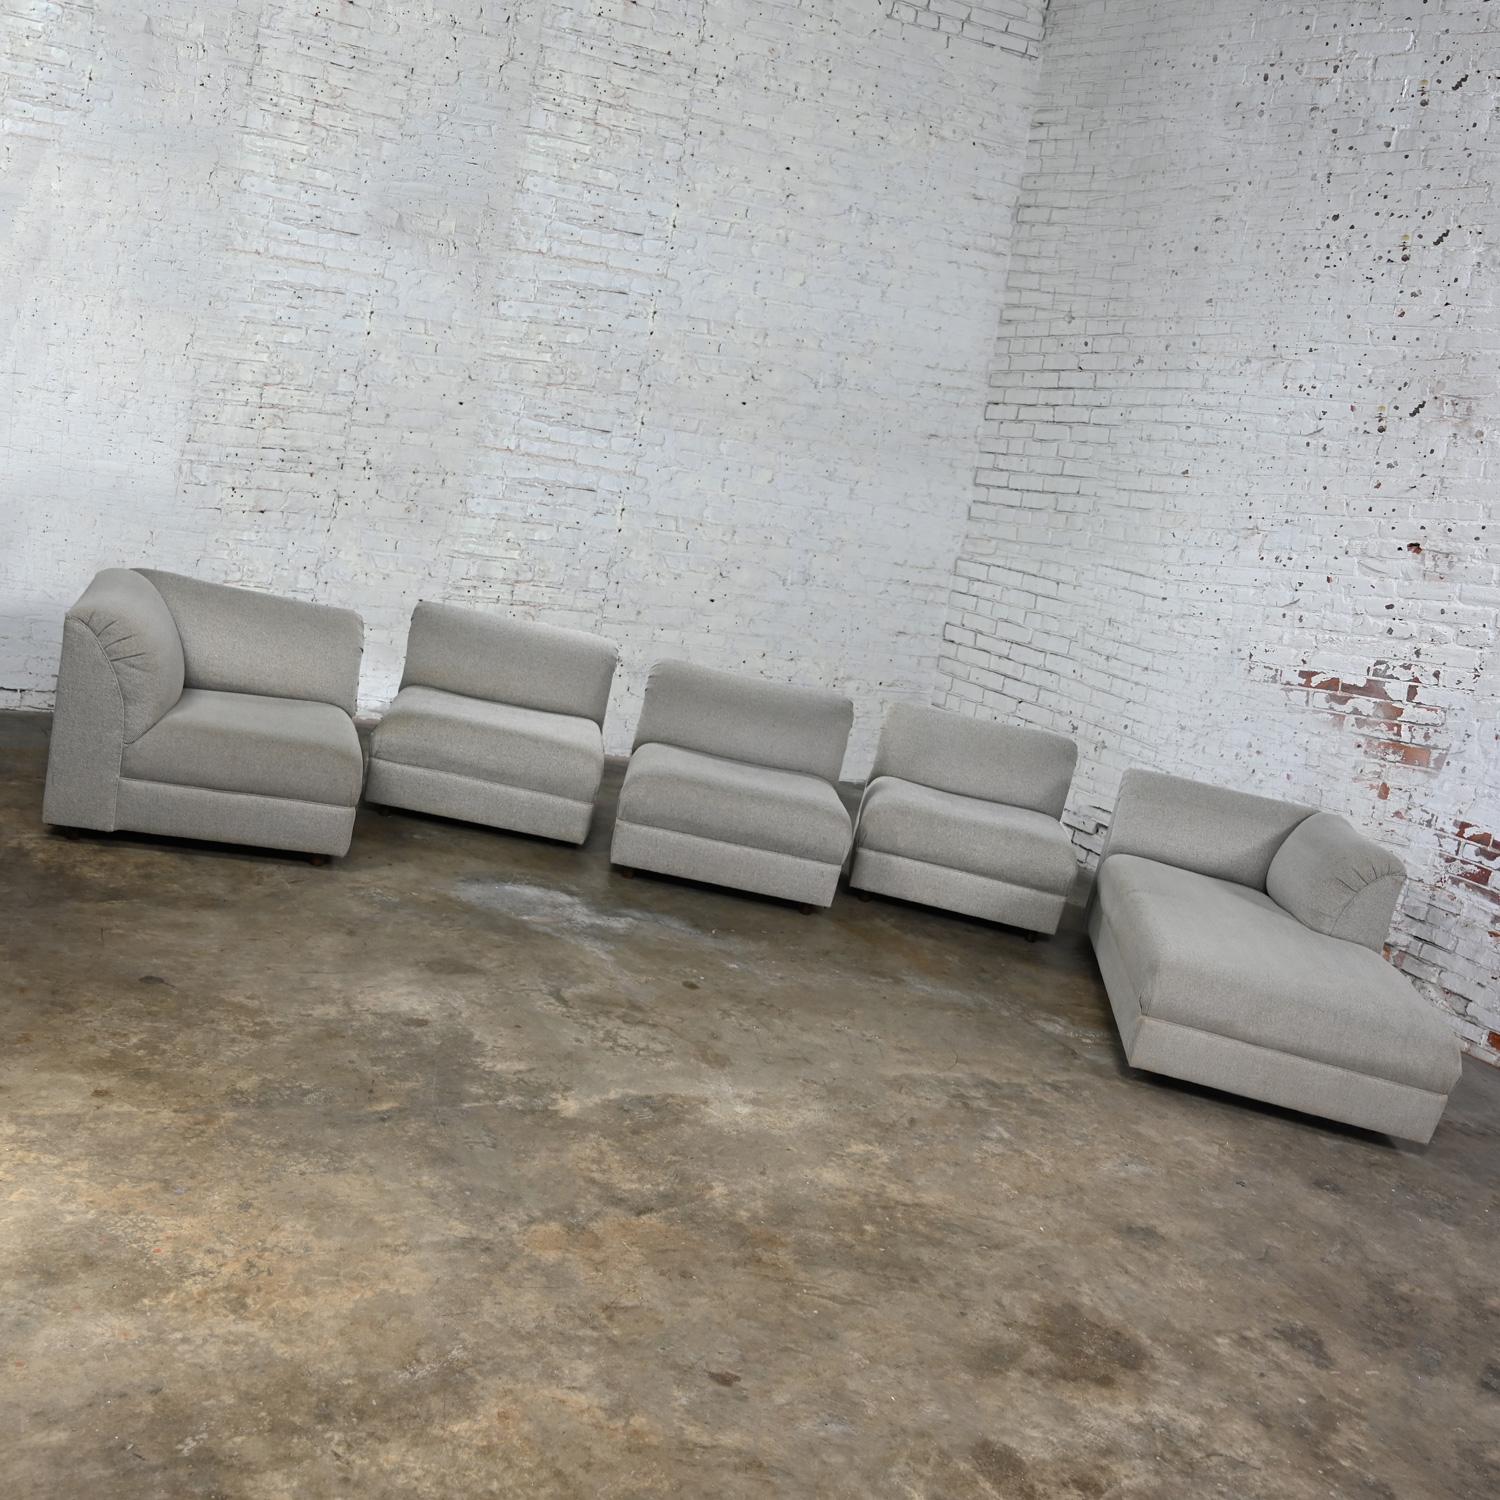 Late 20th Century Modern Modular Sectional Sofa 5 Pieces with Chaise Gray Tweed  For Sale 2